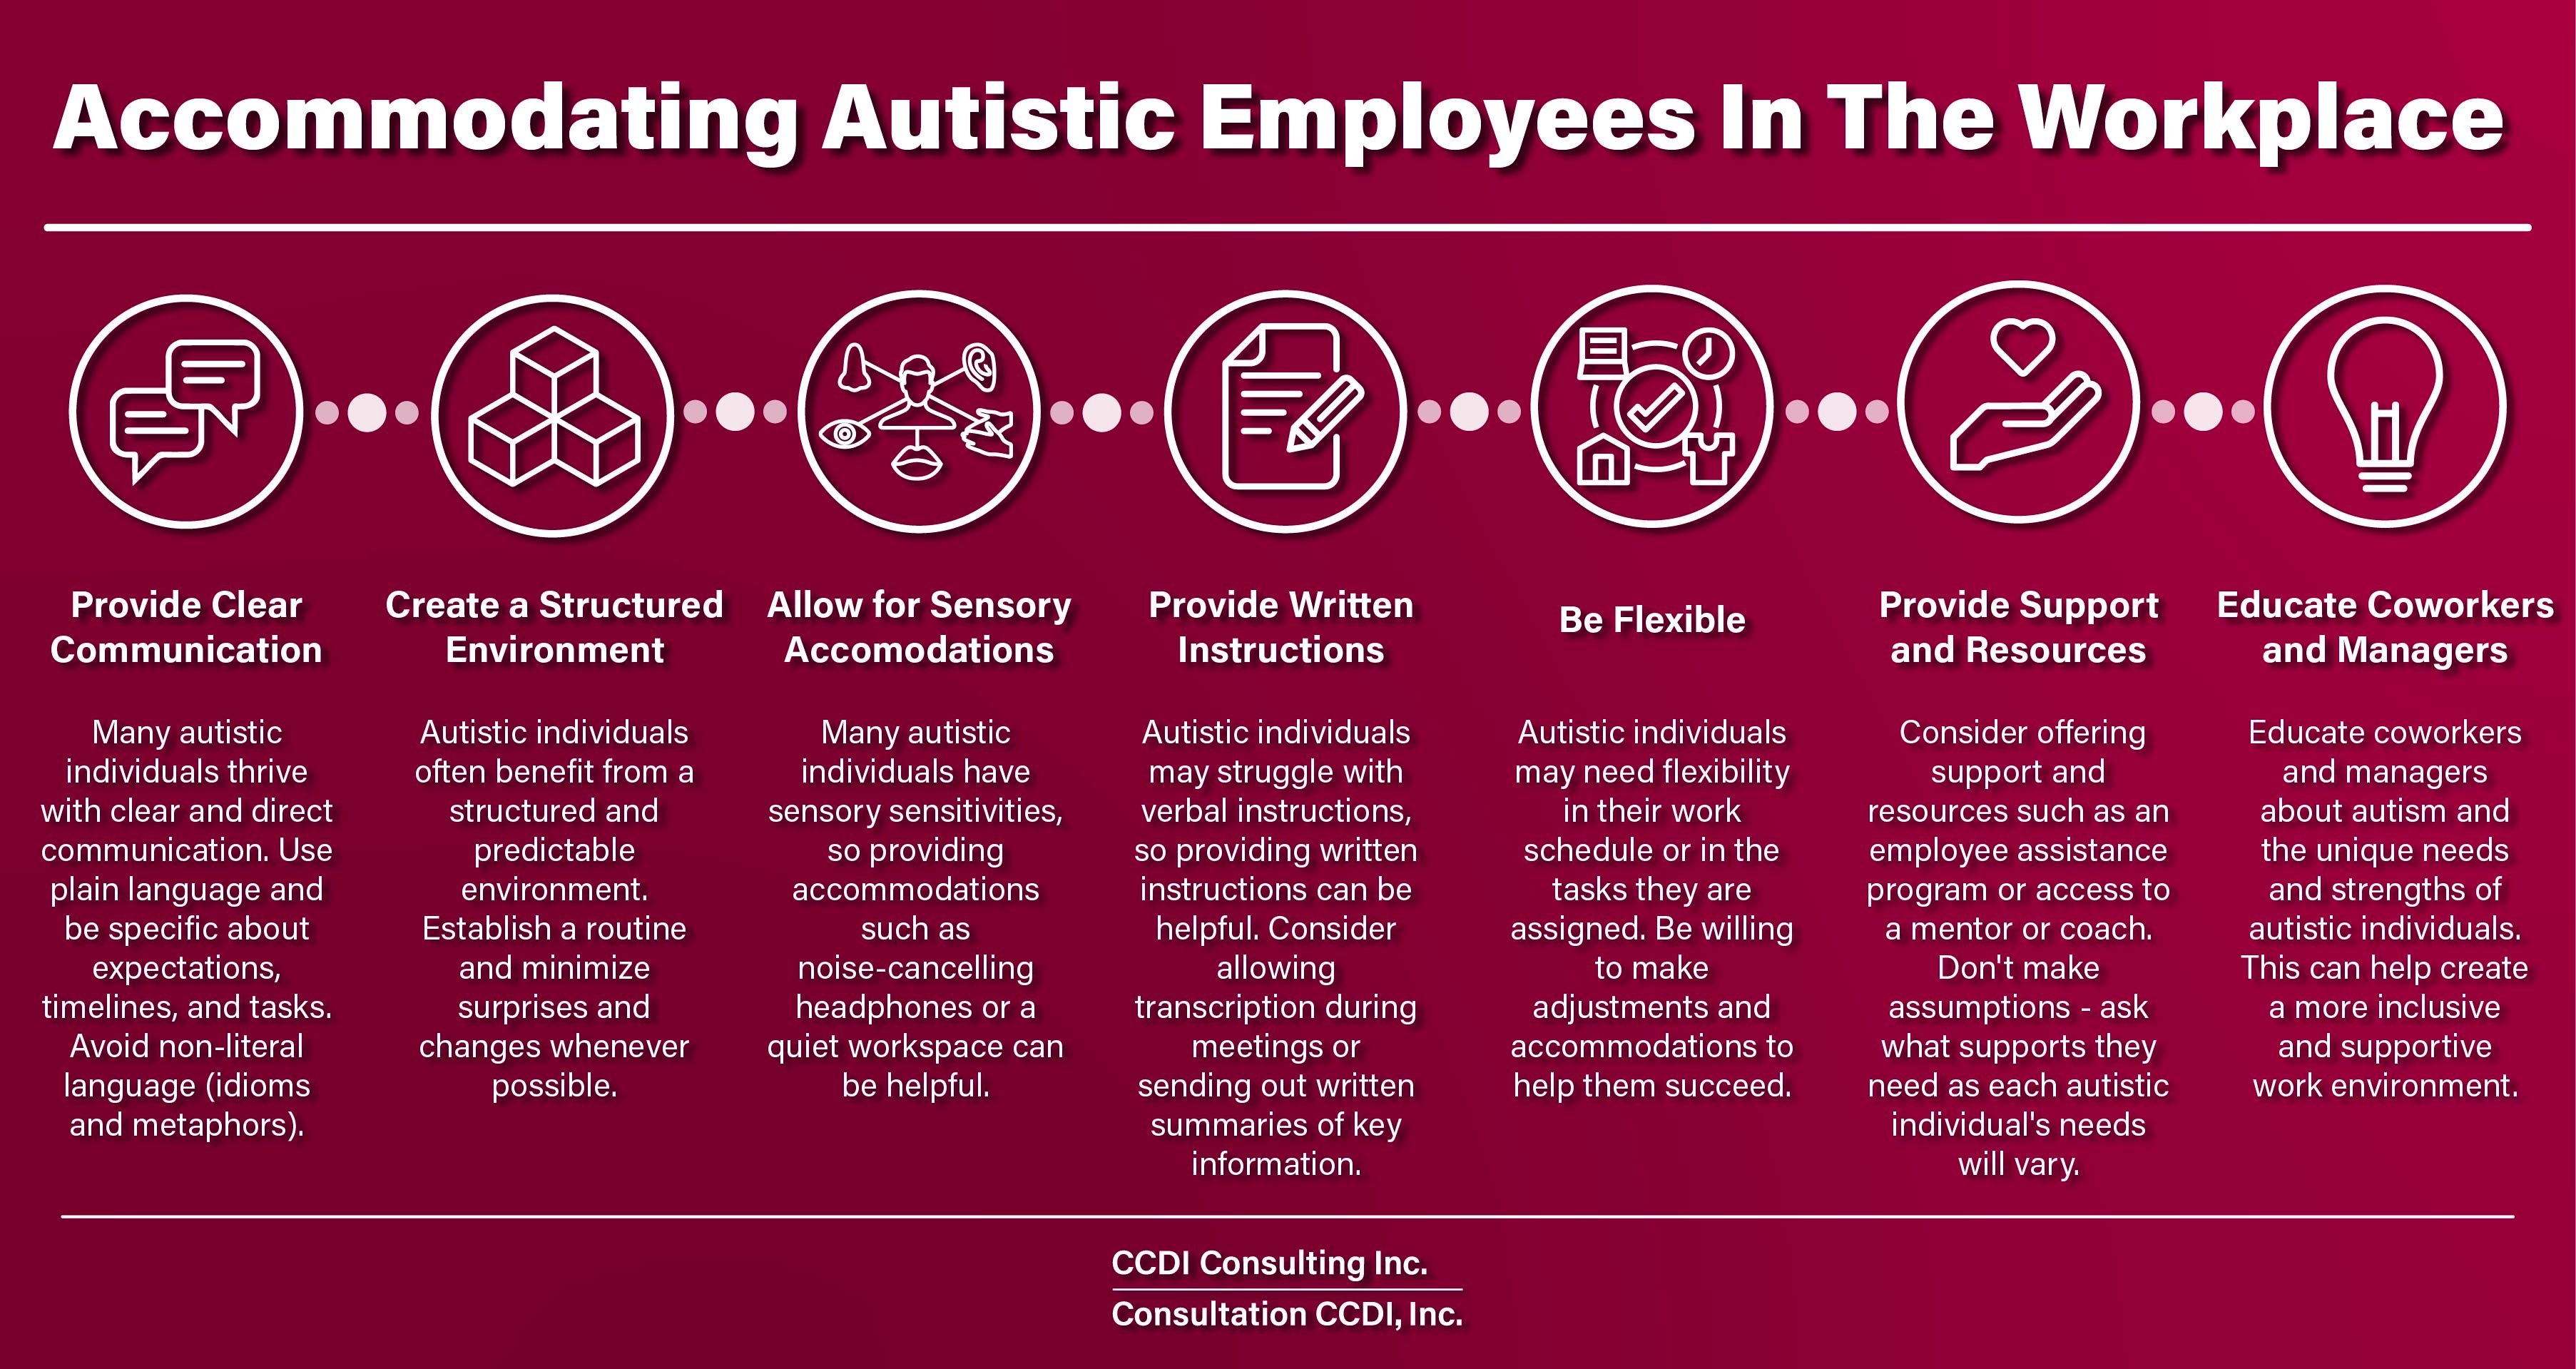 Accomodating Autistic Employees In The Workplace Infographic